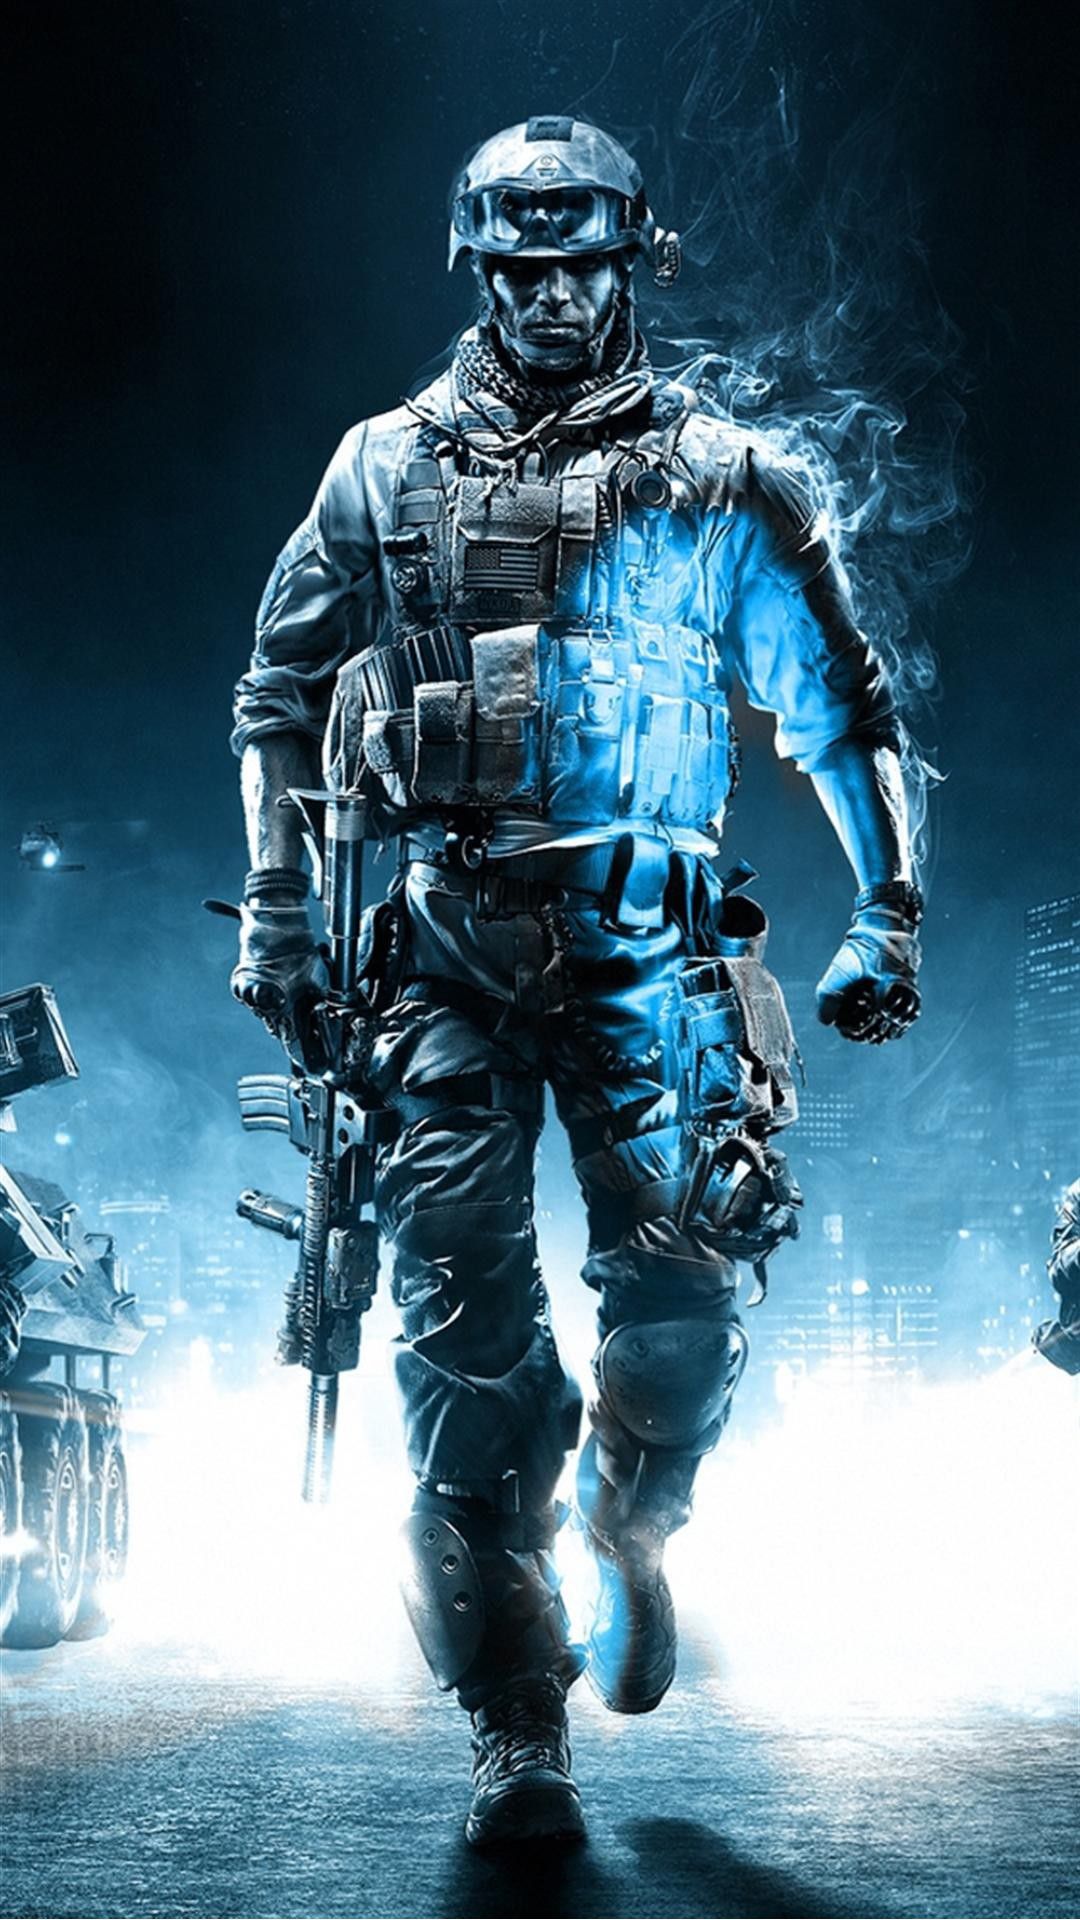 Call of Duty iPhone Background. iPhone Wallpaper, Beautiful iPhone Wallpaper and Awesome iPhone Wallpaper